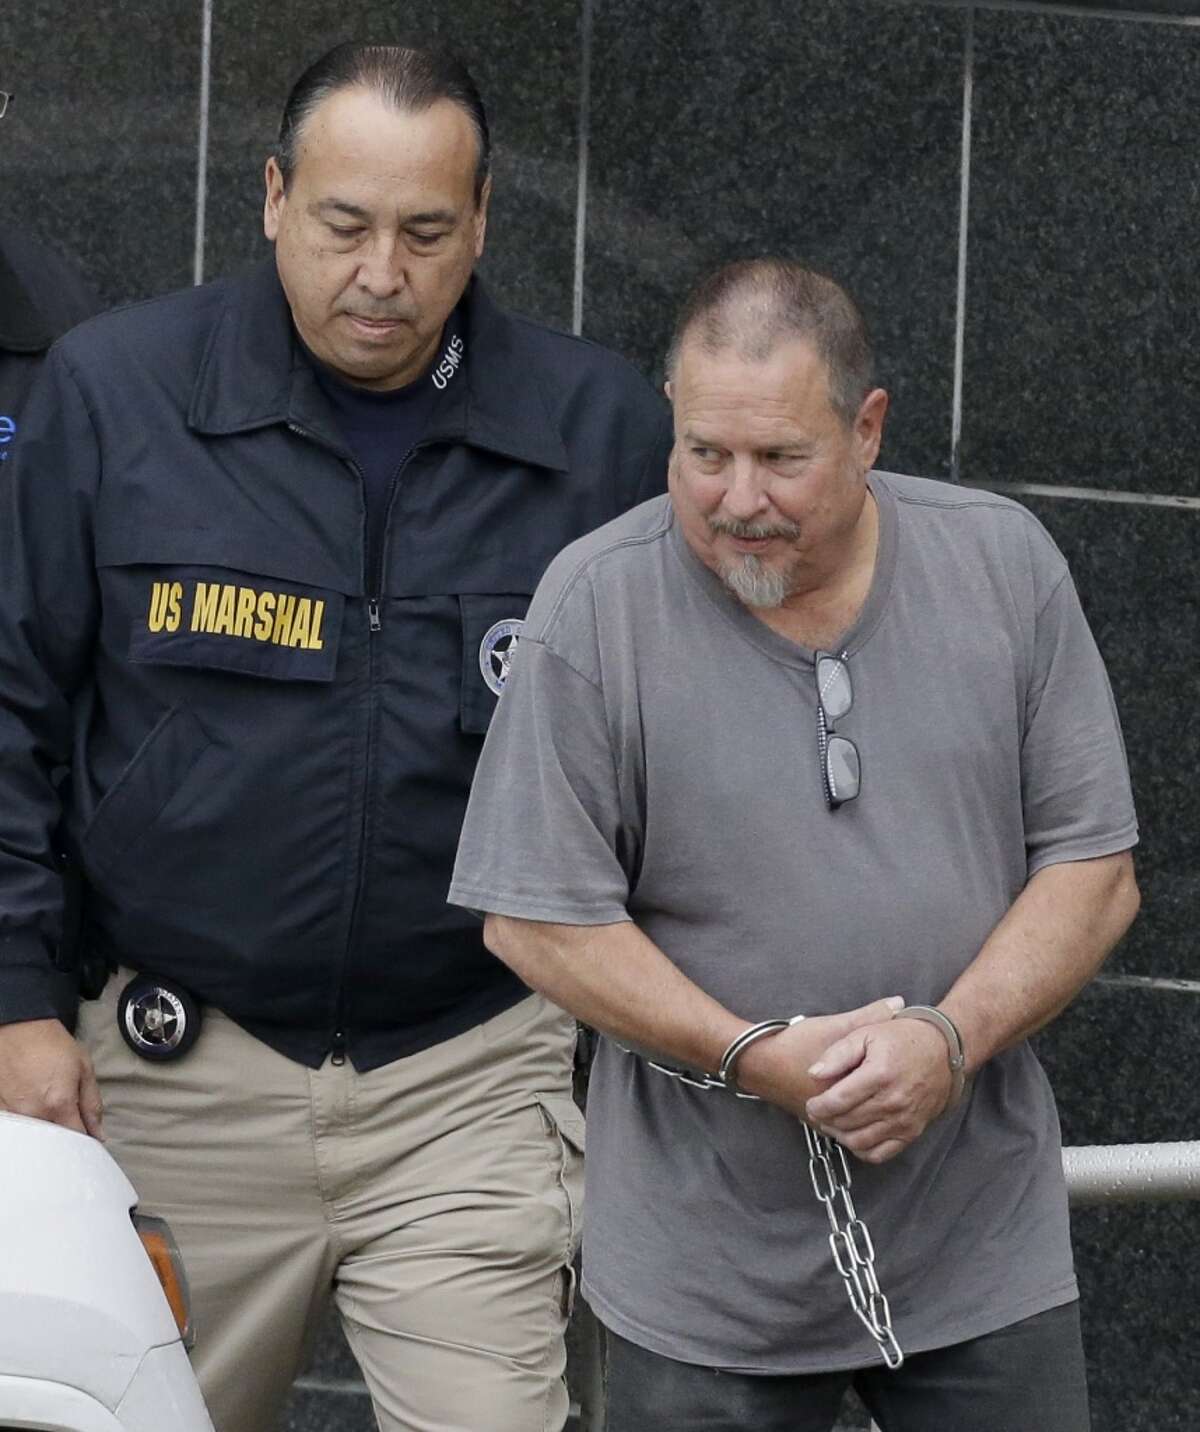 Jeffrey Fay Pike, 60, of Conroe, the national president of the Bandidos Motorcycle Club, is escorted from the Bob Casey Federal Courthouse, 515 Rusk, after an appearance in federal court, where he faced several charges related to his alleged activity with the Bandidos Motorcycle Club shown Wednesday, Jan. 6, 2016, in Houston. ( Melissa Phillip / Houston Chronicle ) Jeffrey Ray Pike is escorted by a U. S. Marshal after an appearance in federal court, where he faced several charges related to his alleged activity with the Bandidos Motorcycle Club Wednesday, Jan. 6, 2016, in Houston. ( Melissa Phillip / Houston Chronicle )